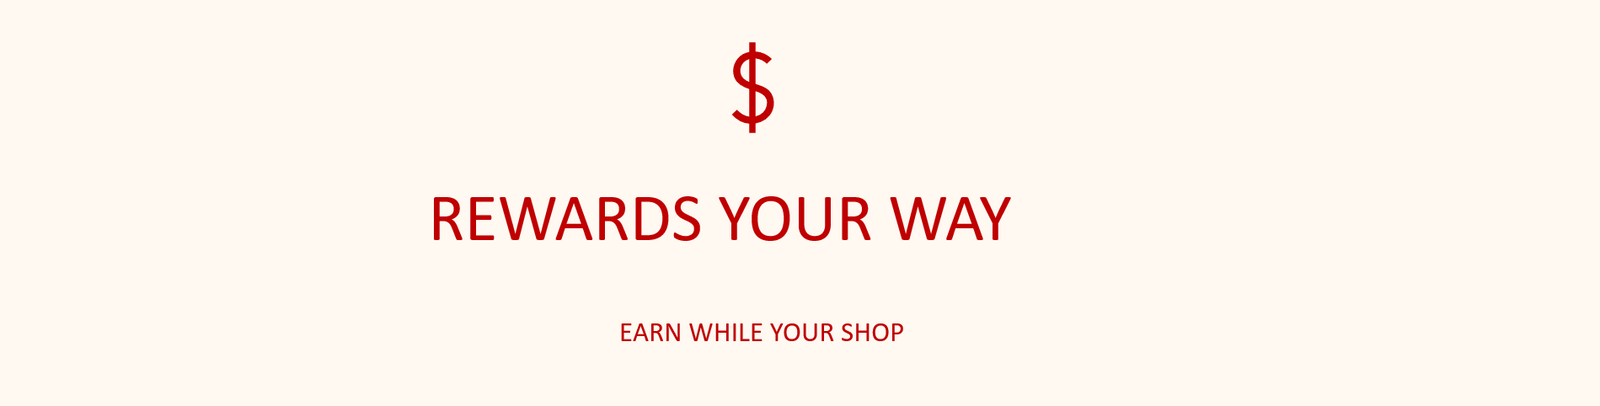 Dollar sign large text below rewards your way followed by smaller text earn while your shop